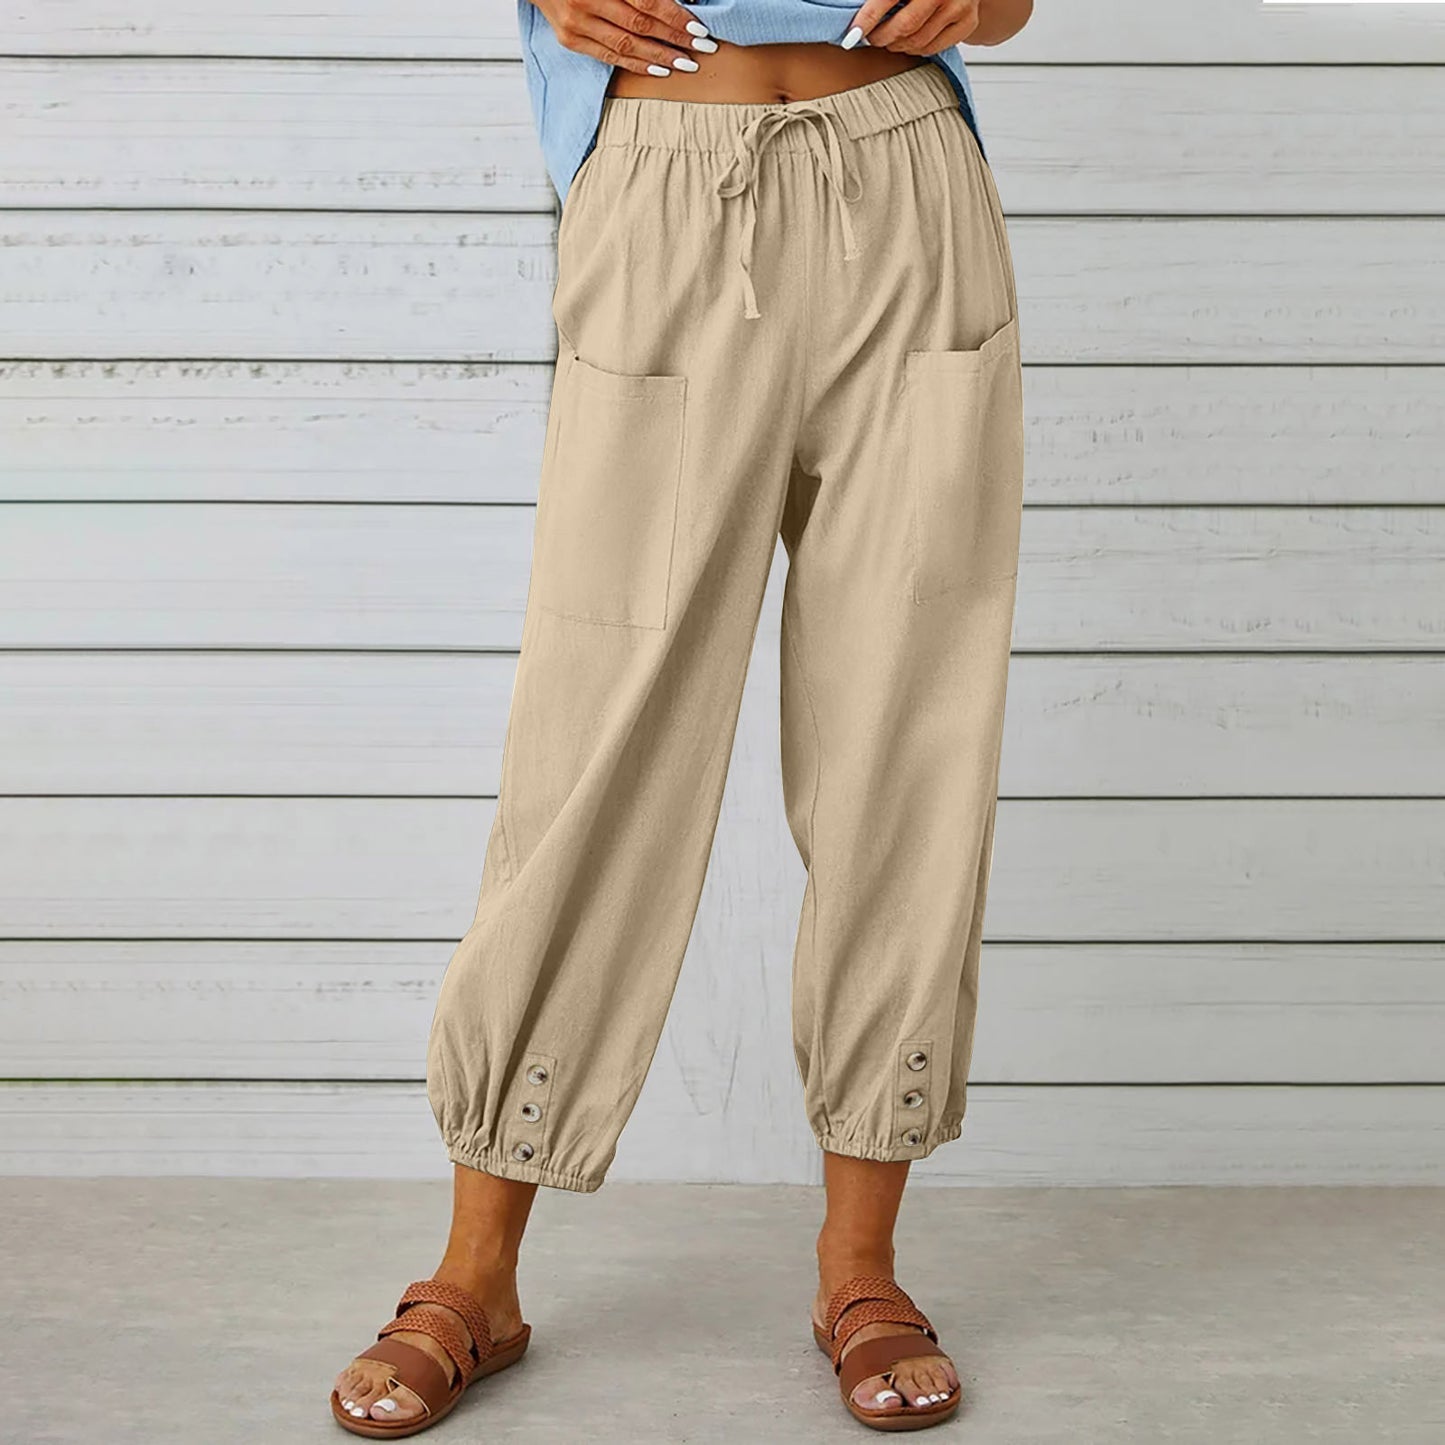 Drawstring Tie Pants for Summer